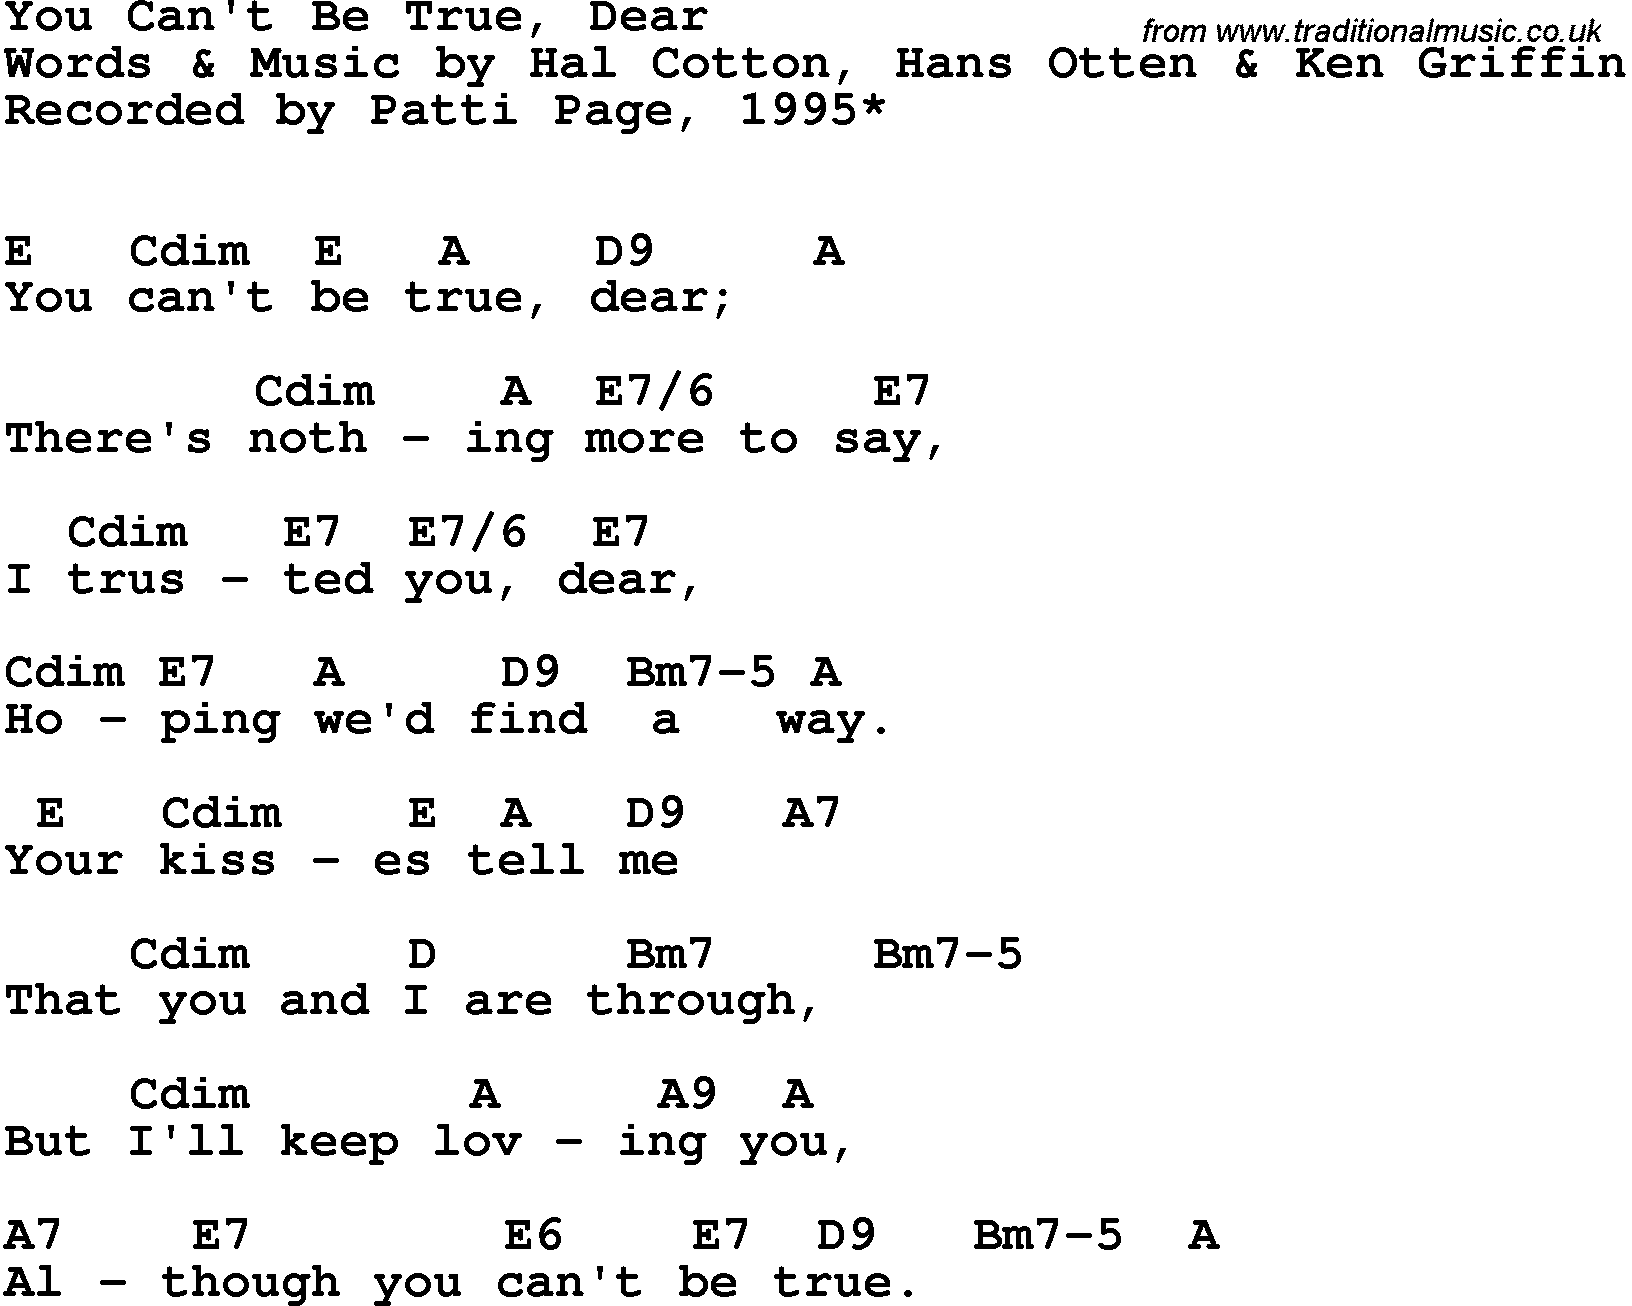 Song Lyrics with guitar chords for You Can't Be True, Dear - Patti Page, 1995